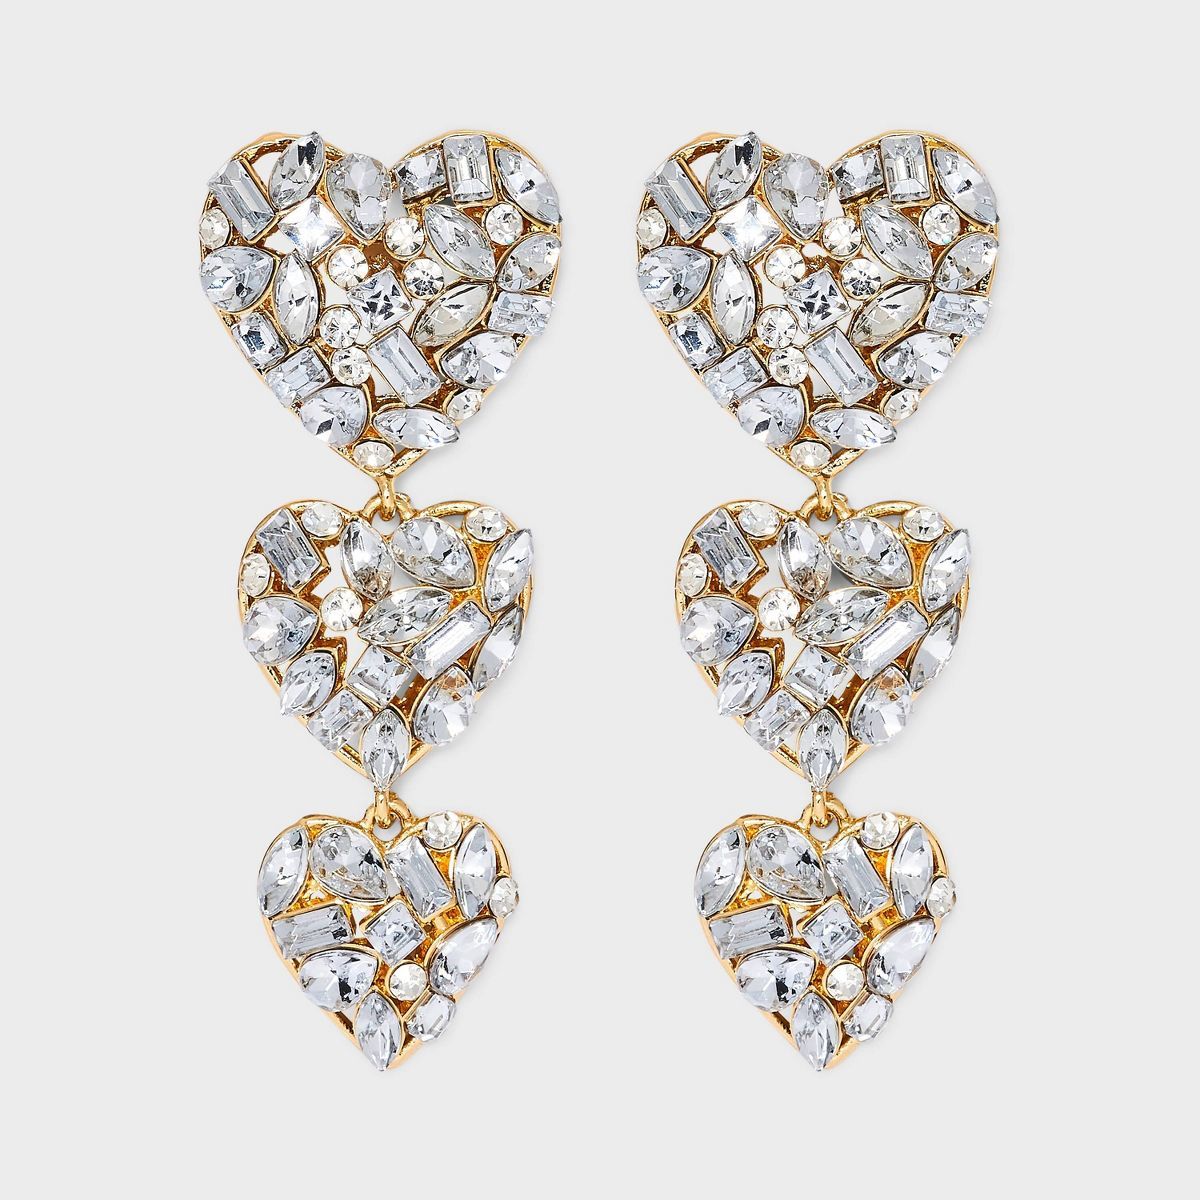 SUGARFIX by BaubleBar "Crystal Cluster Heart" Statement Drop Earrings - Gold | Target